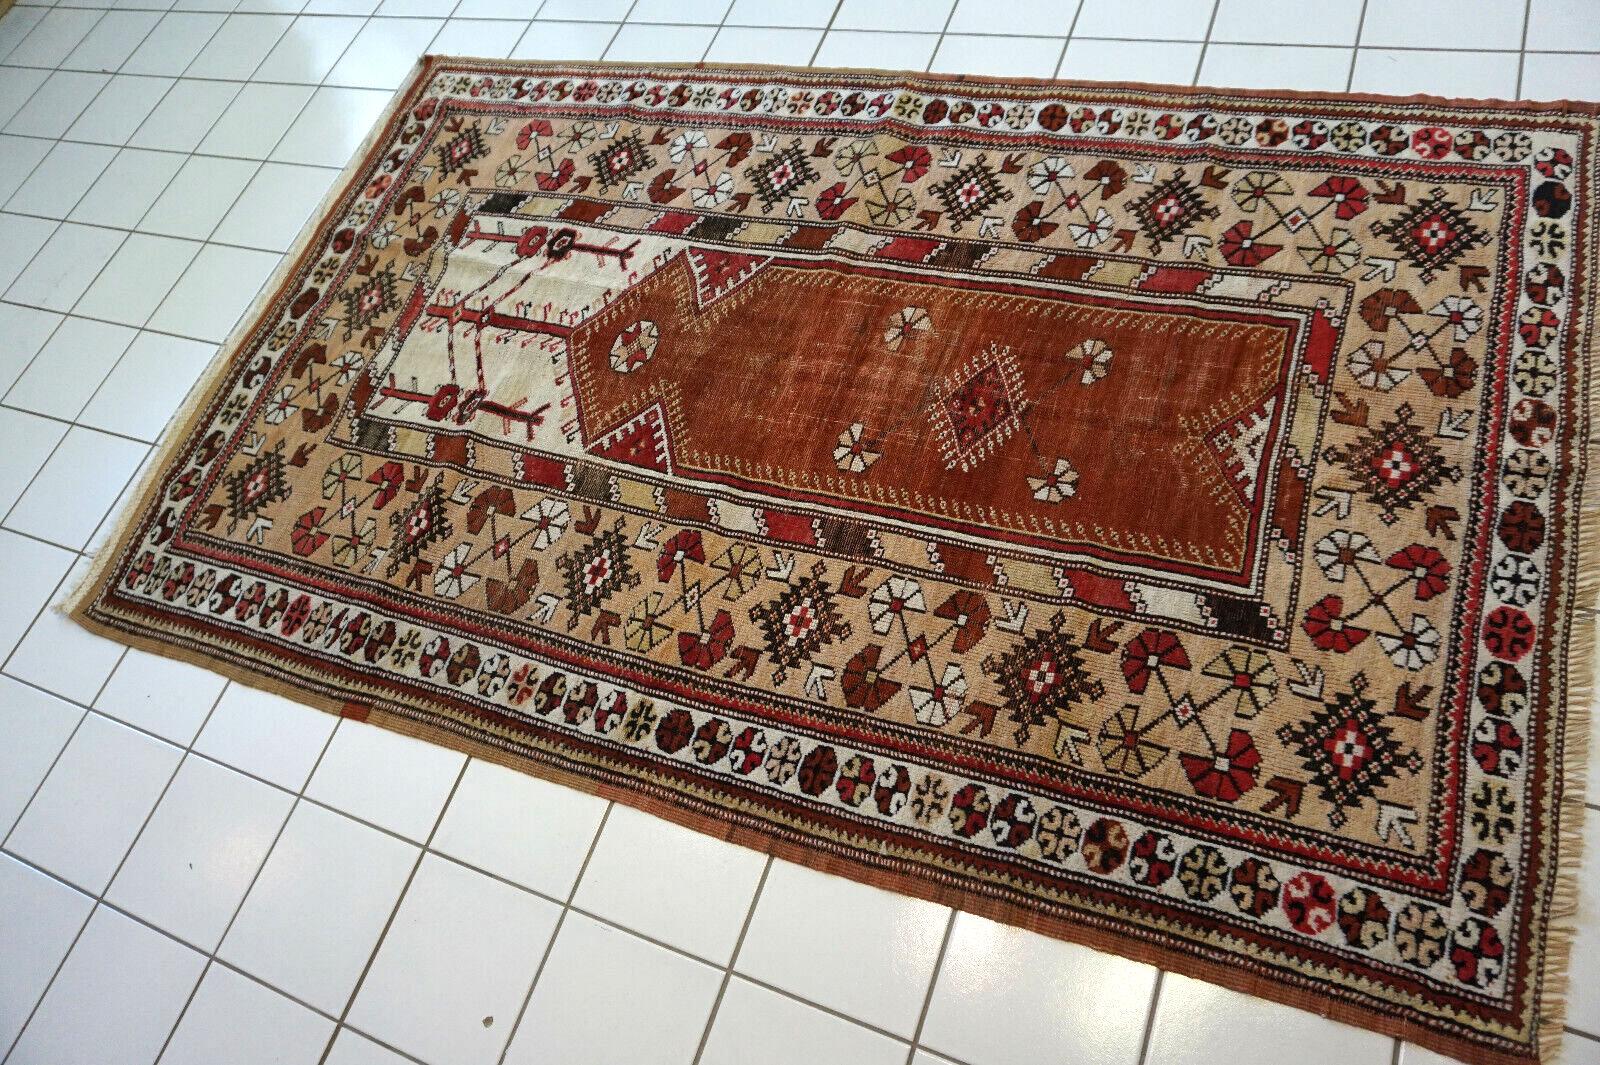 Design and Patterns:

This rug showcases a rich, intricate design typical of traditional Turkish Melas rugs.
Geometric patterns and symbols adorn the surface, reflecting the cultural heritage of Anatolia.
The warm, earthy primary color sets the